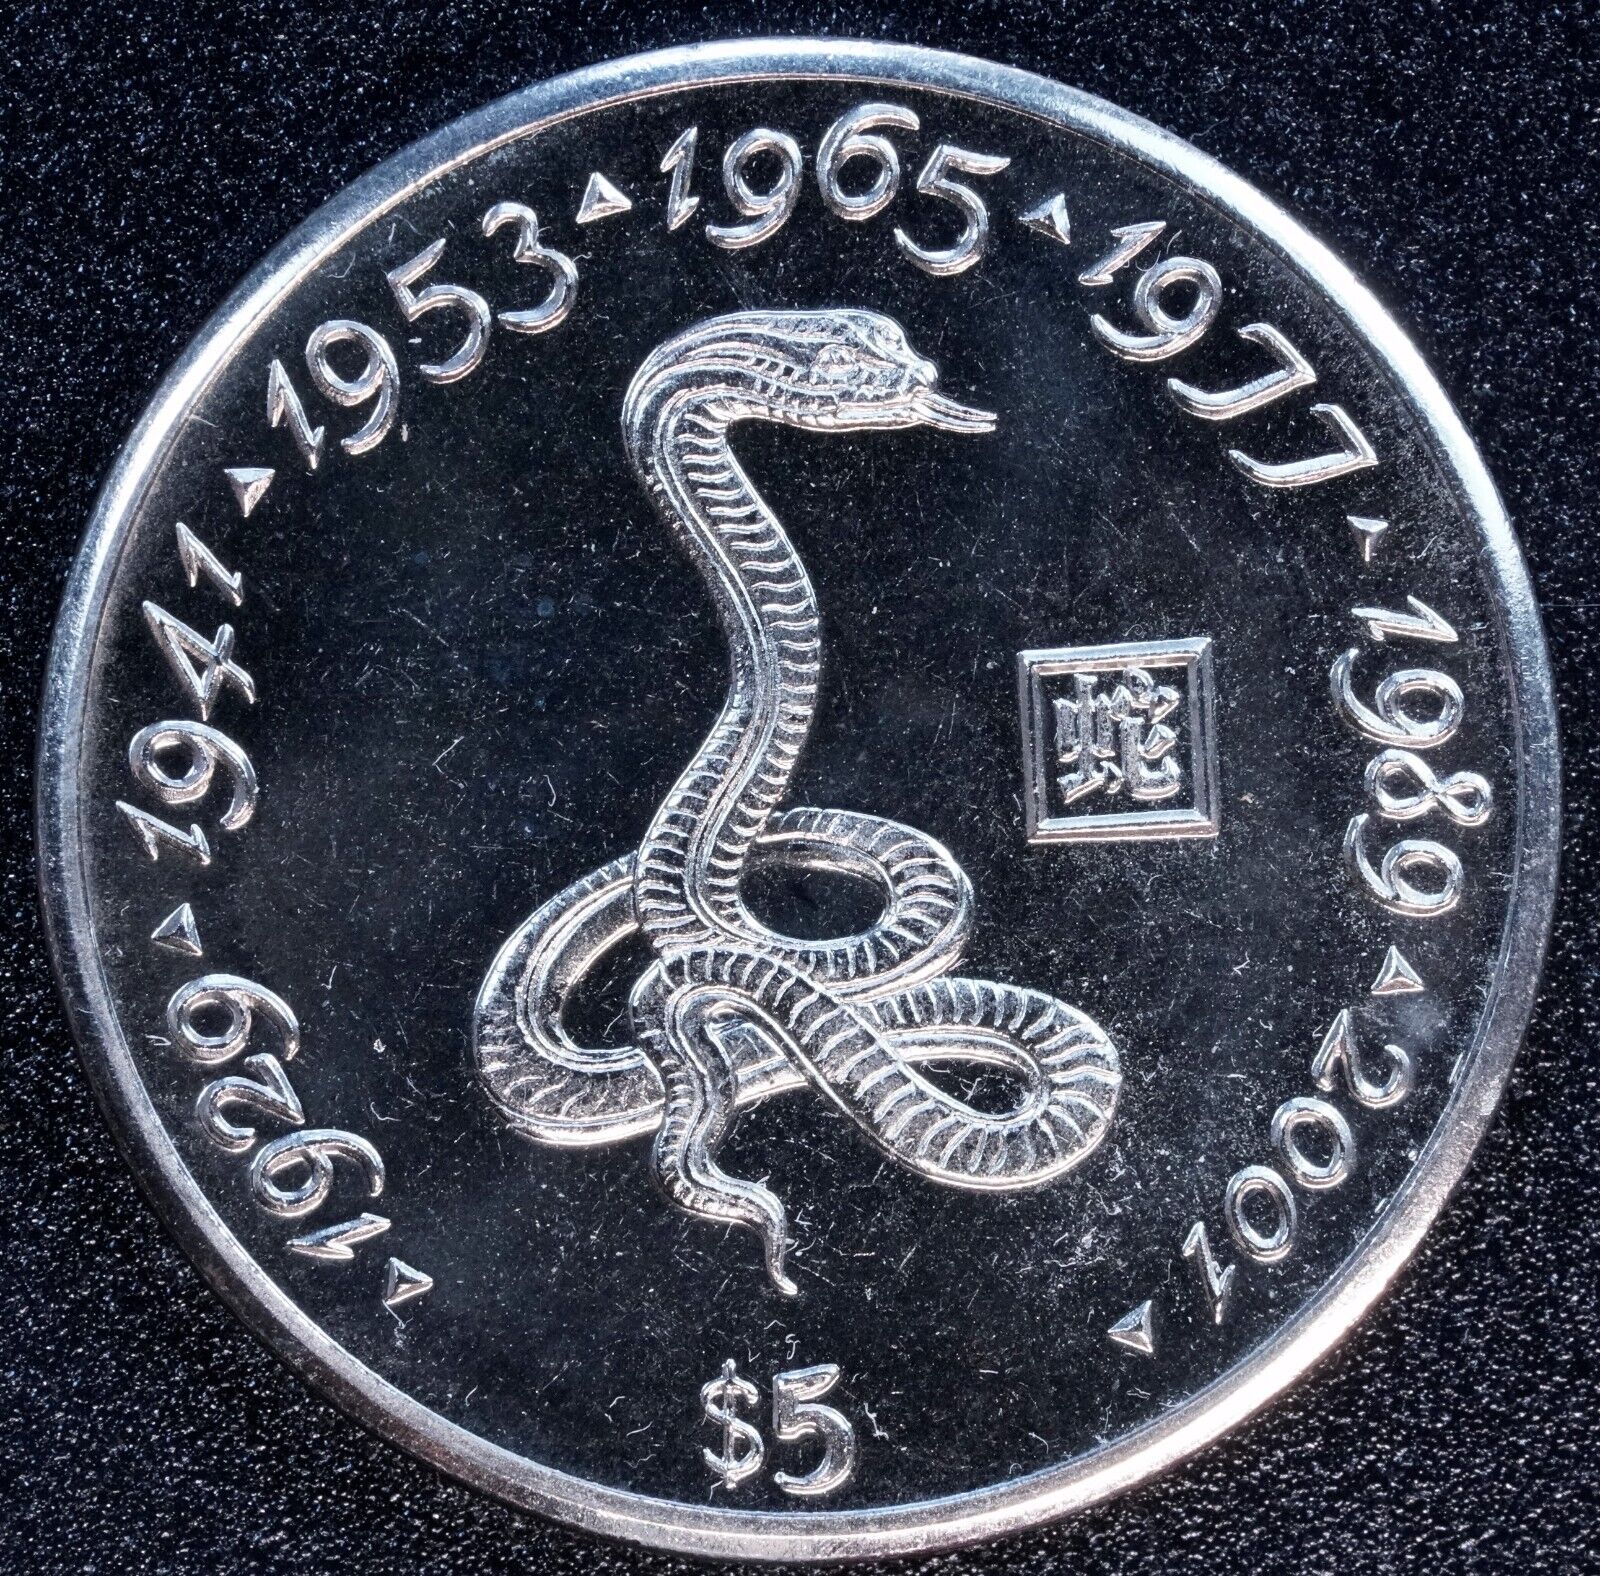 1997 5 Dollars Year Of The Snake Liberia Uncirculated Commemorative Coin